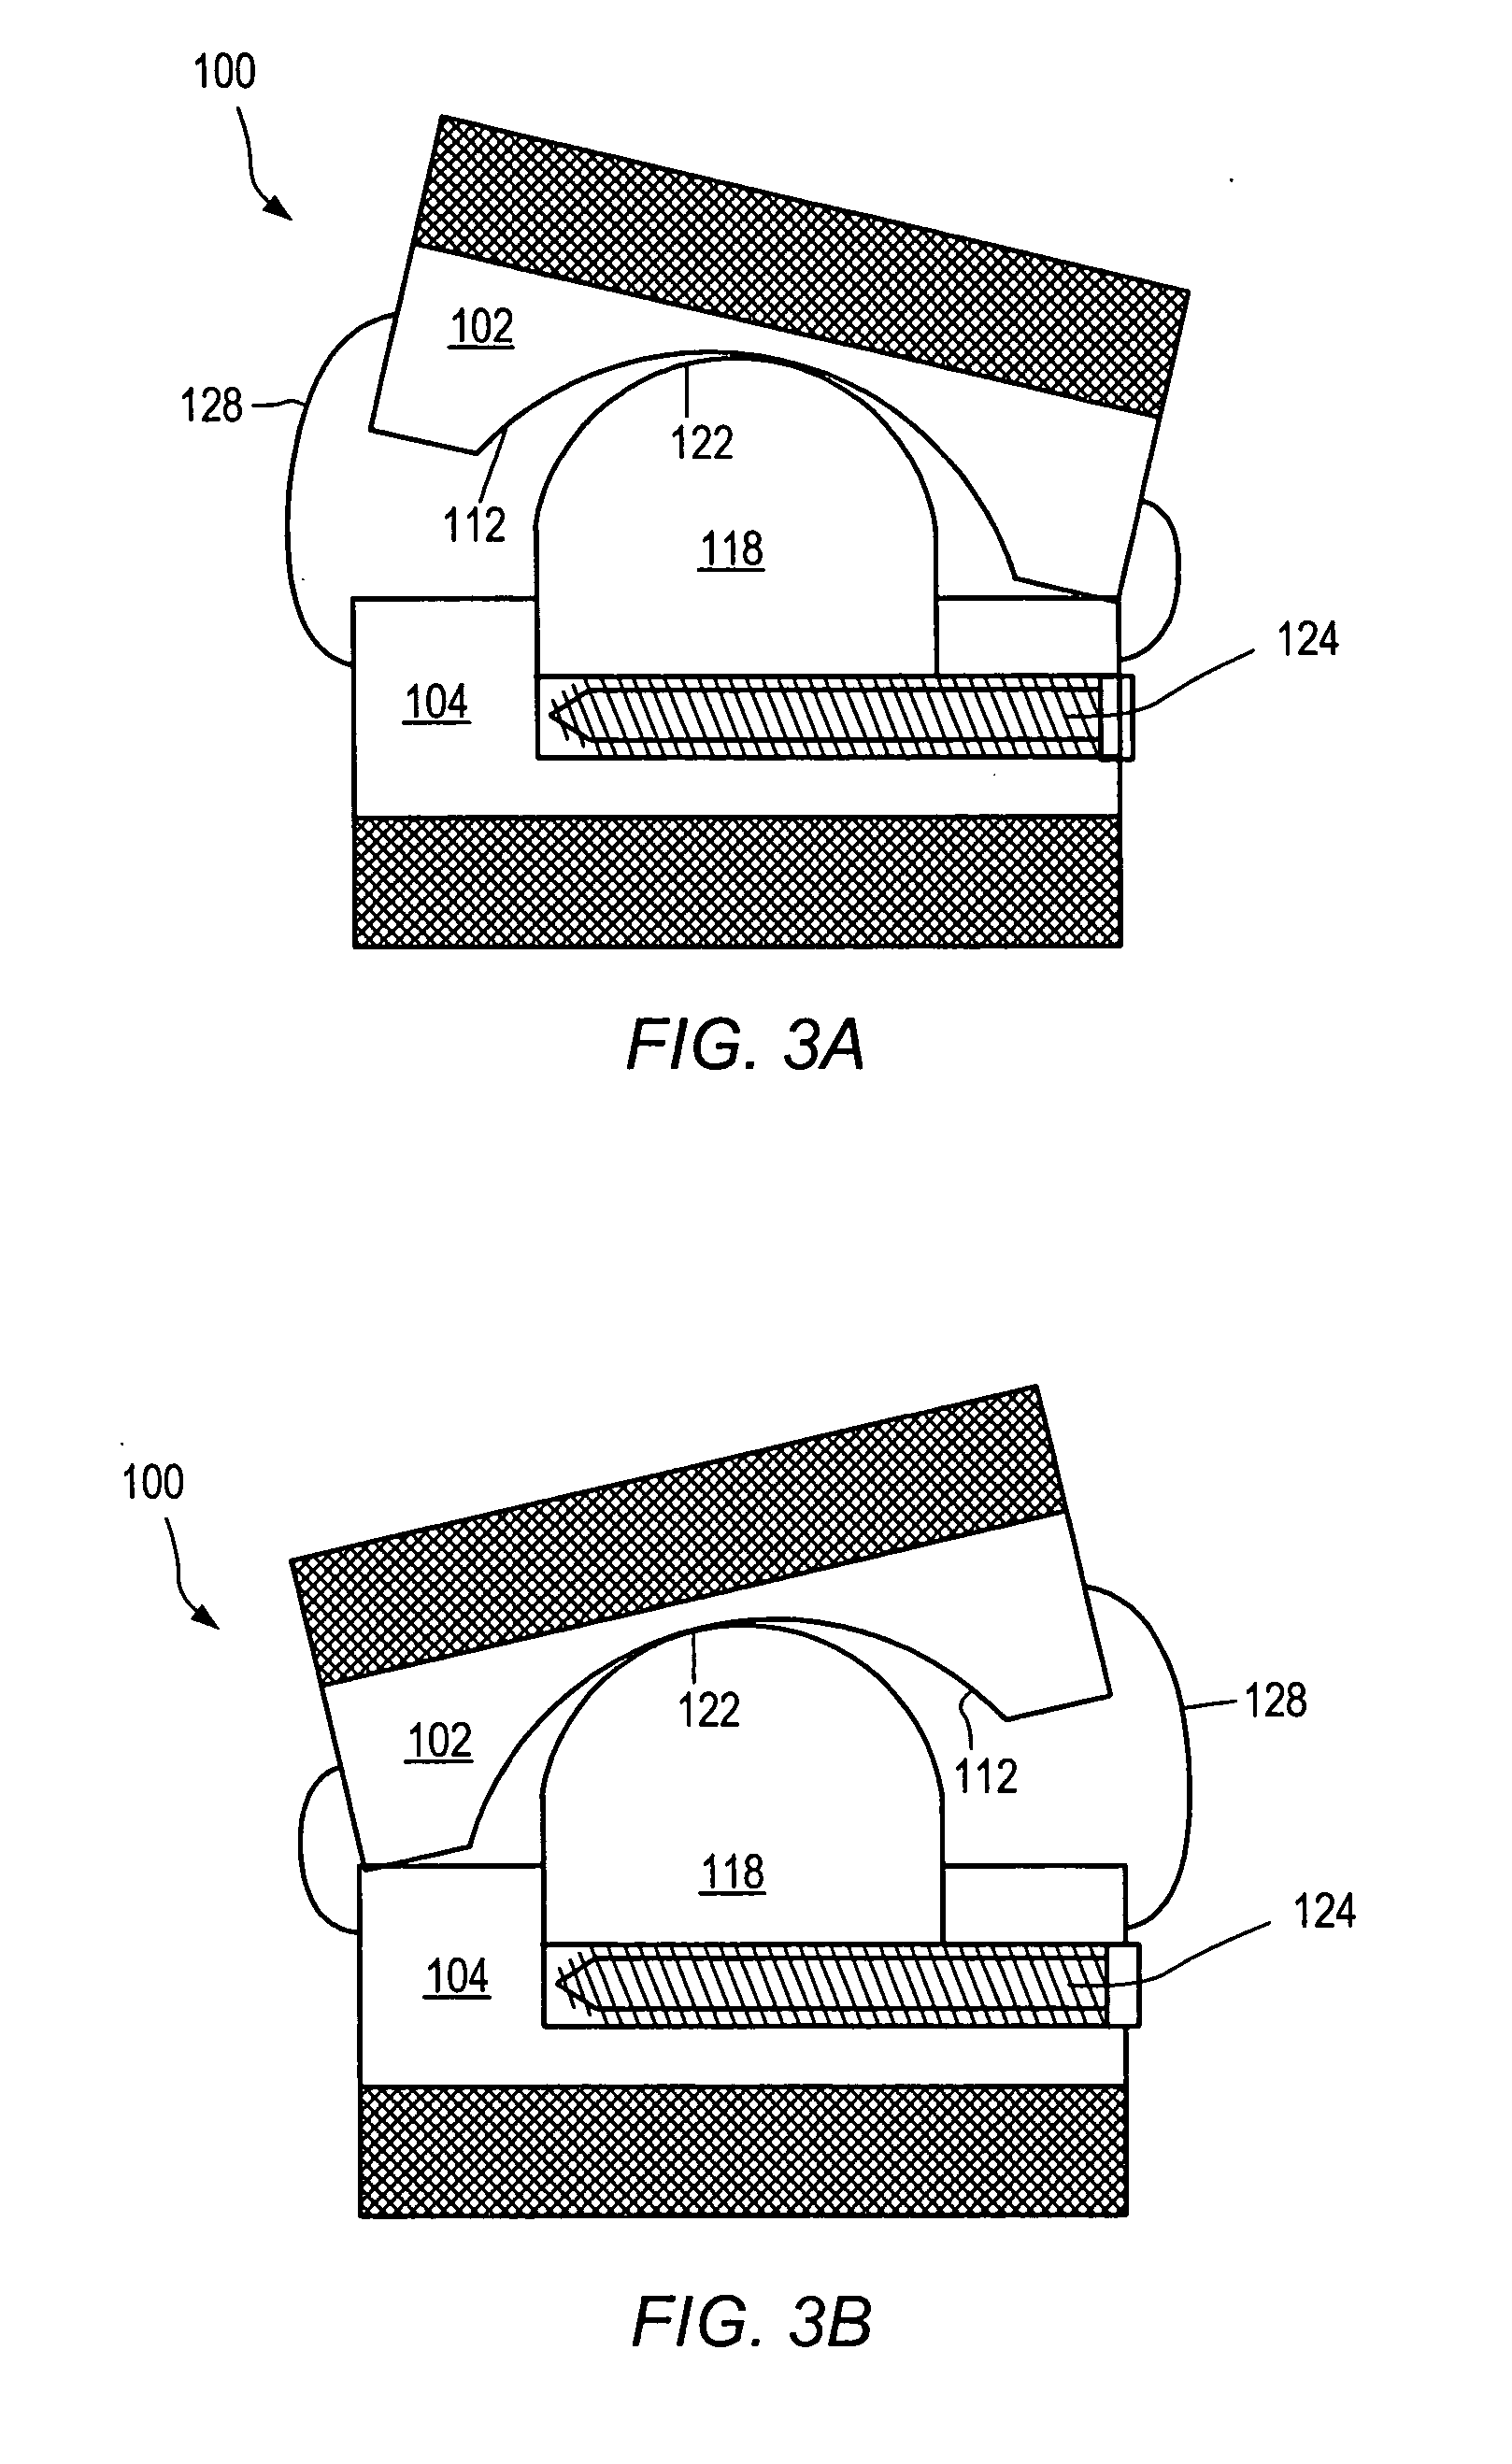 Expandable articulating intervertebral implant with spacer